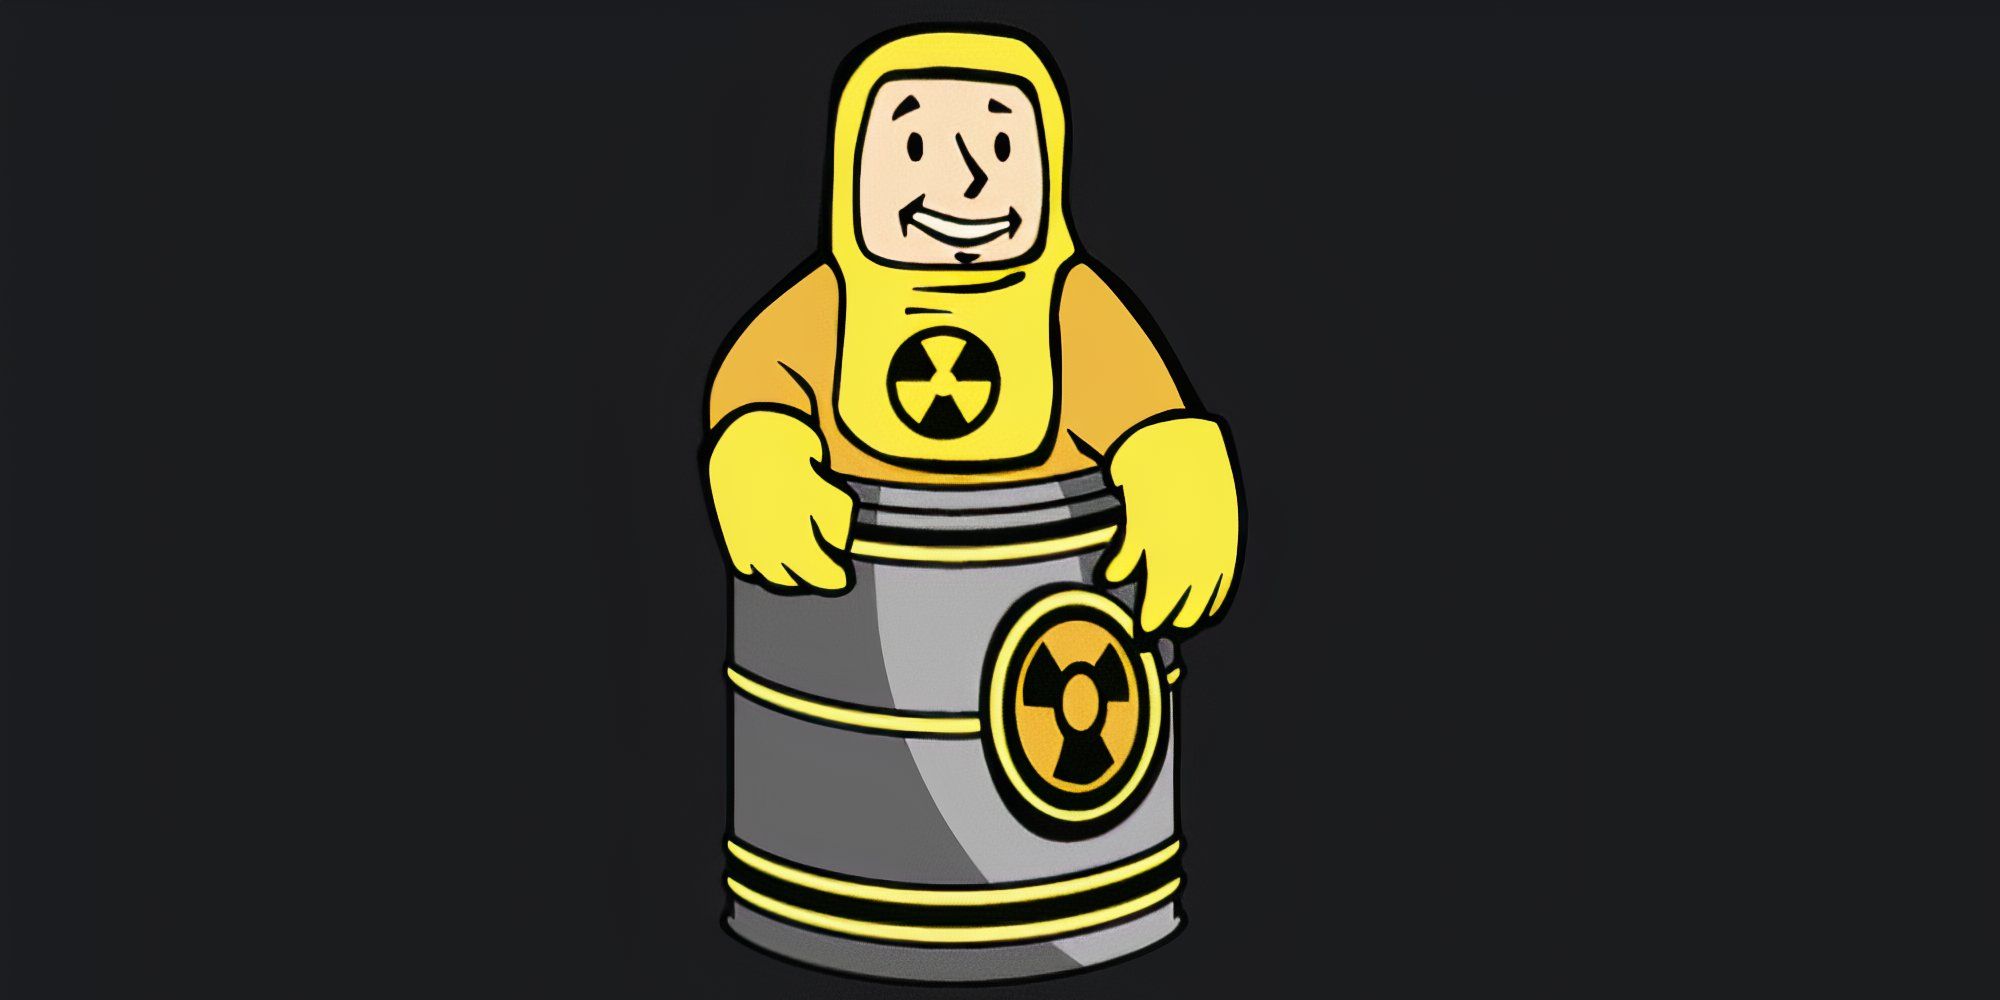 Vault Boy wears a hazmat suit and sits in an irradiated barrel